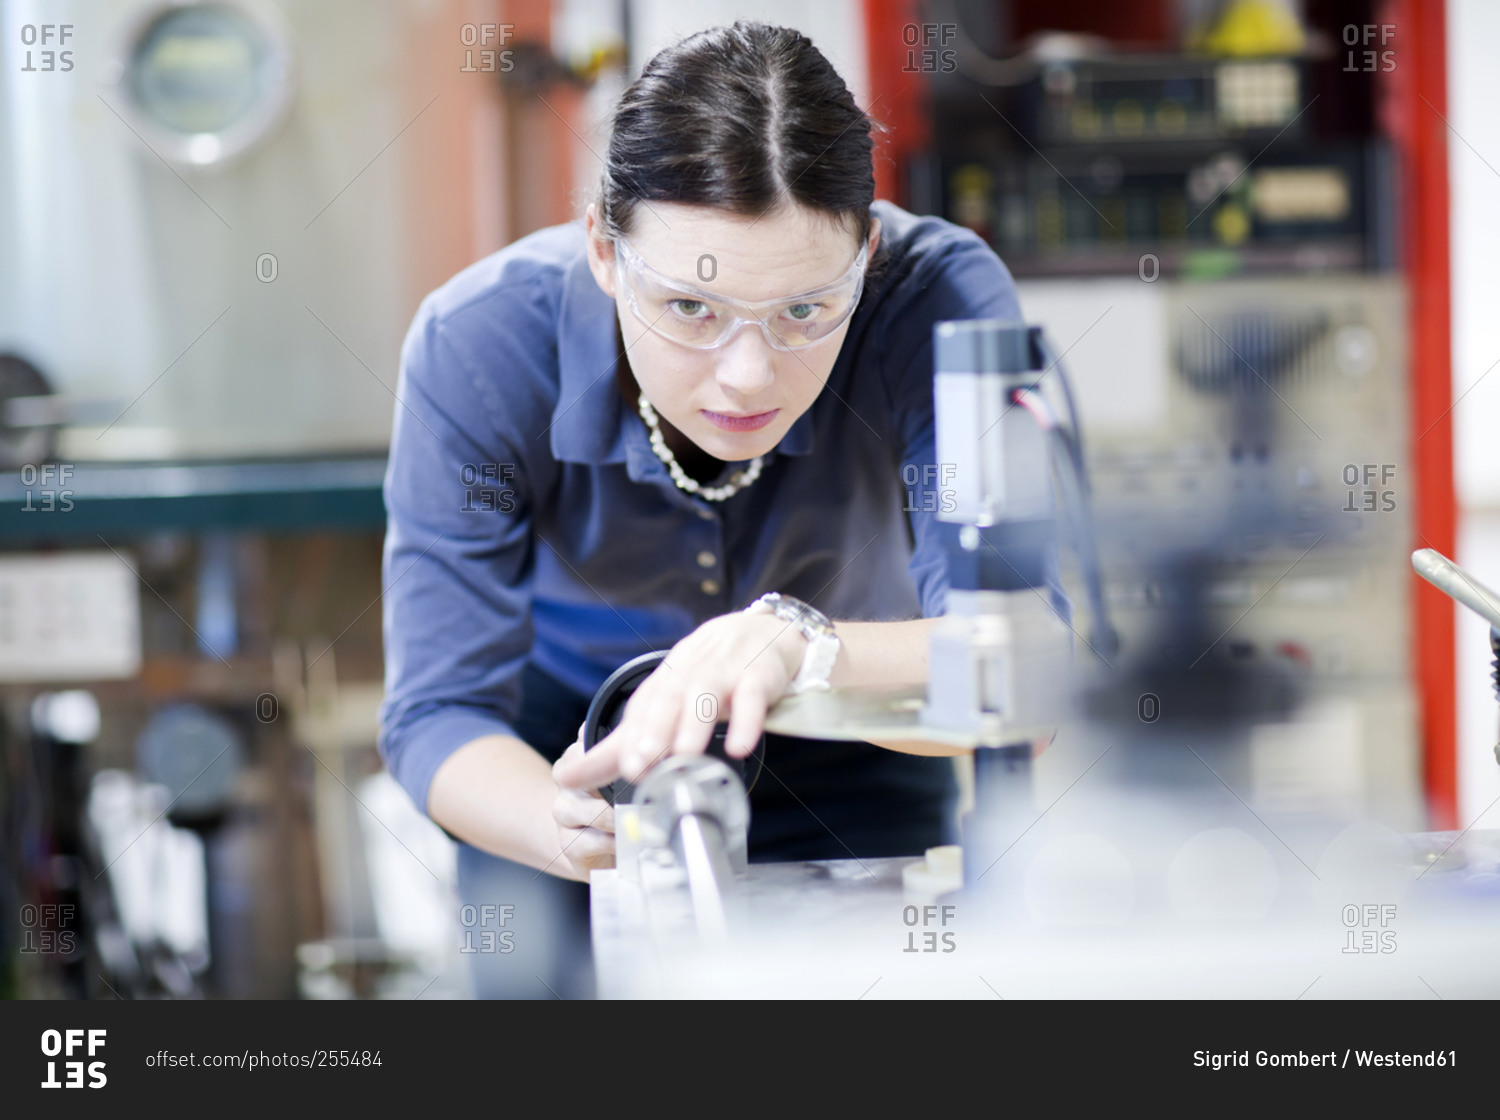 Young woman with safety goggles working at machine